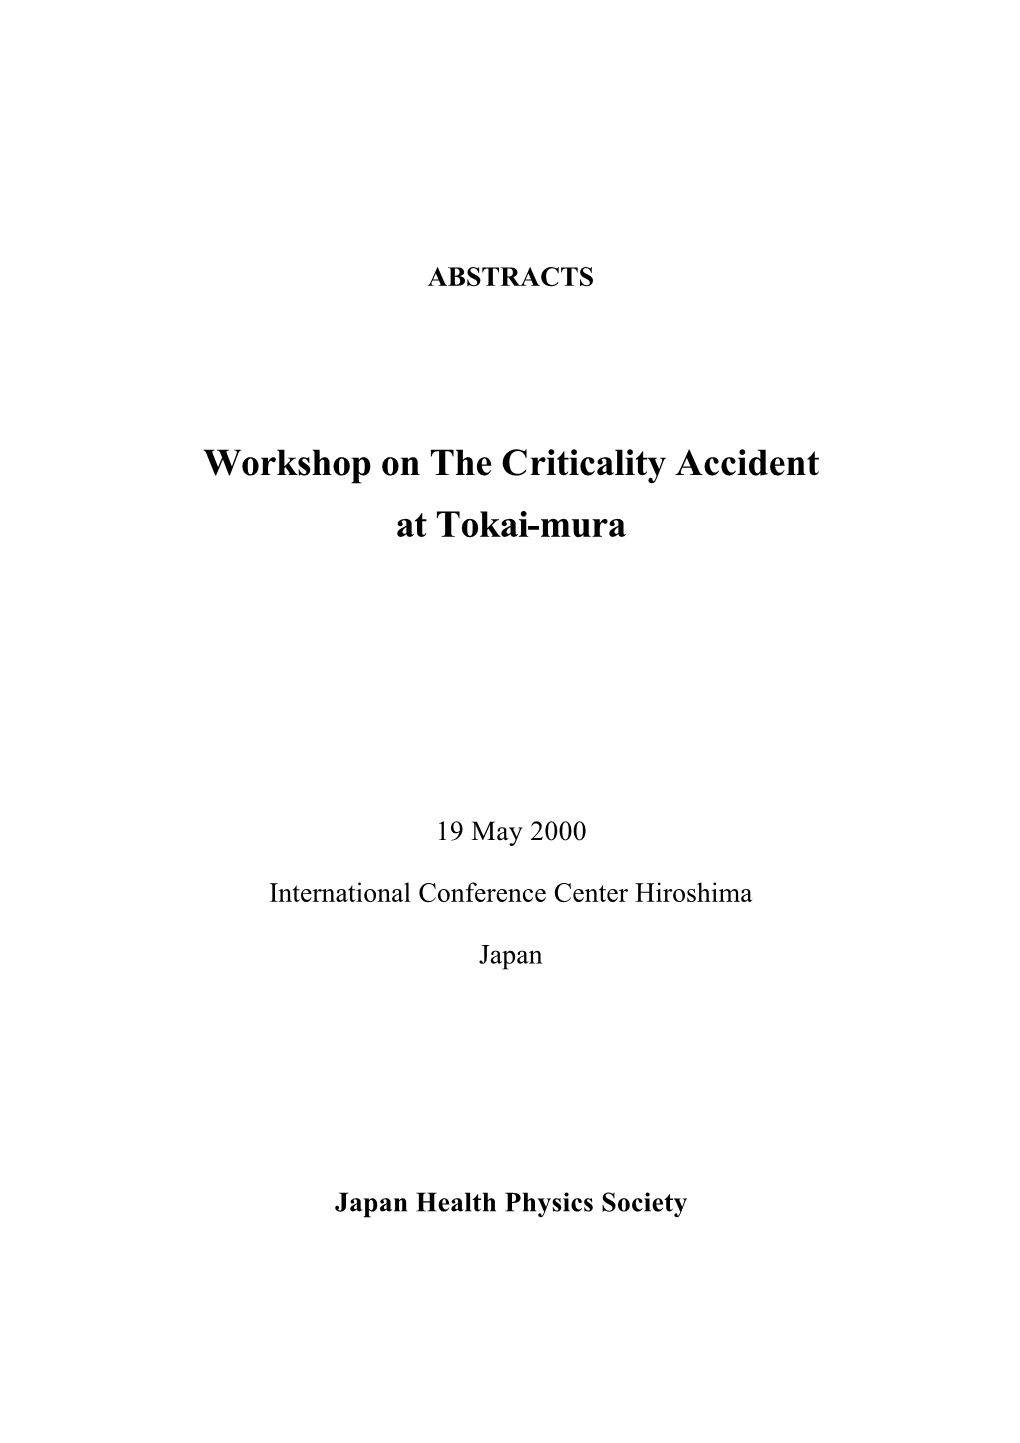 Workshop on the Criticality Accident at Tokai-Mura